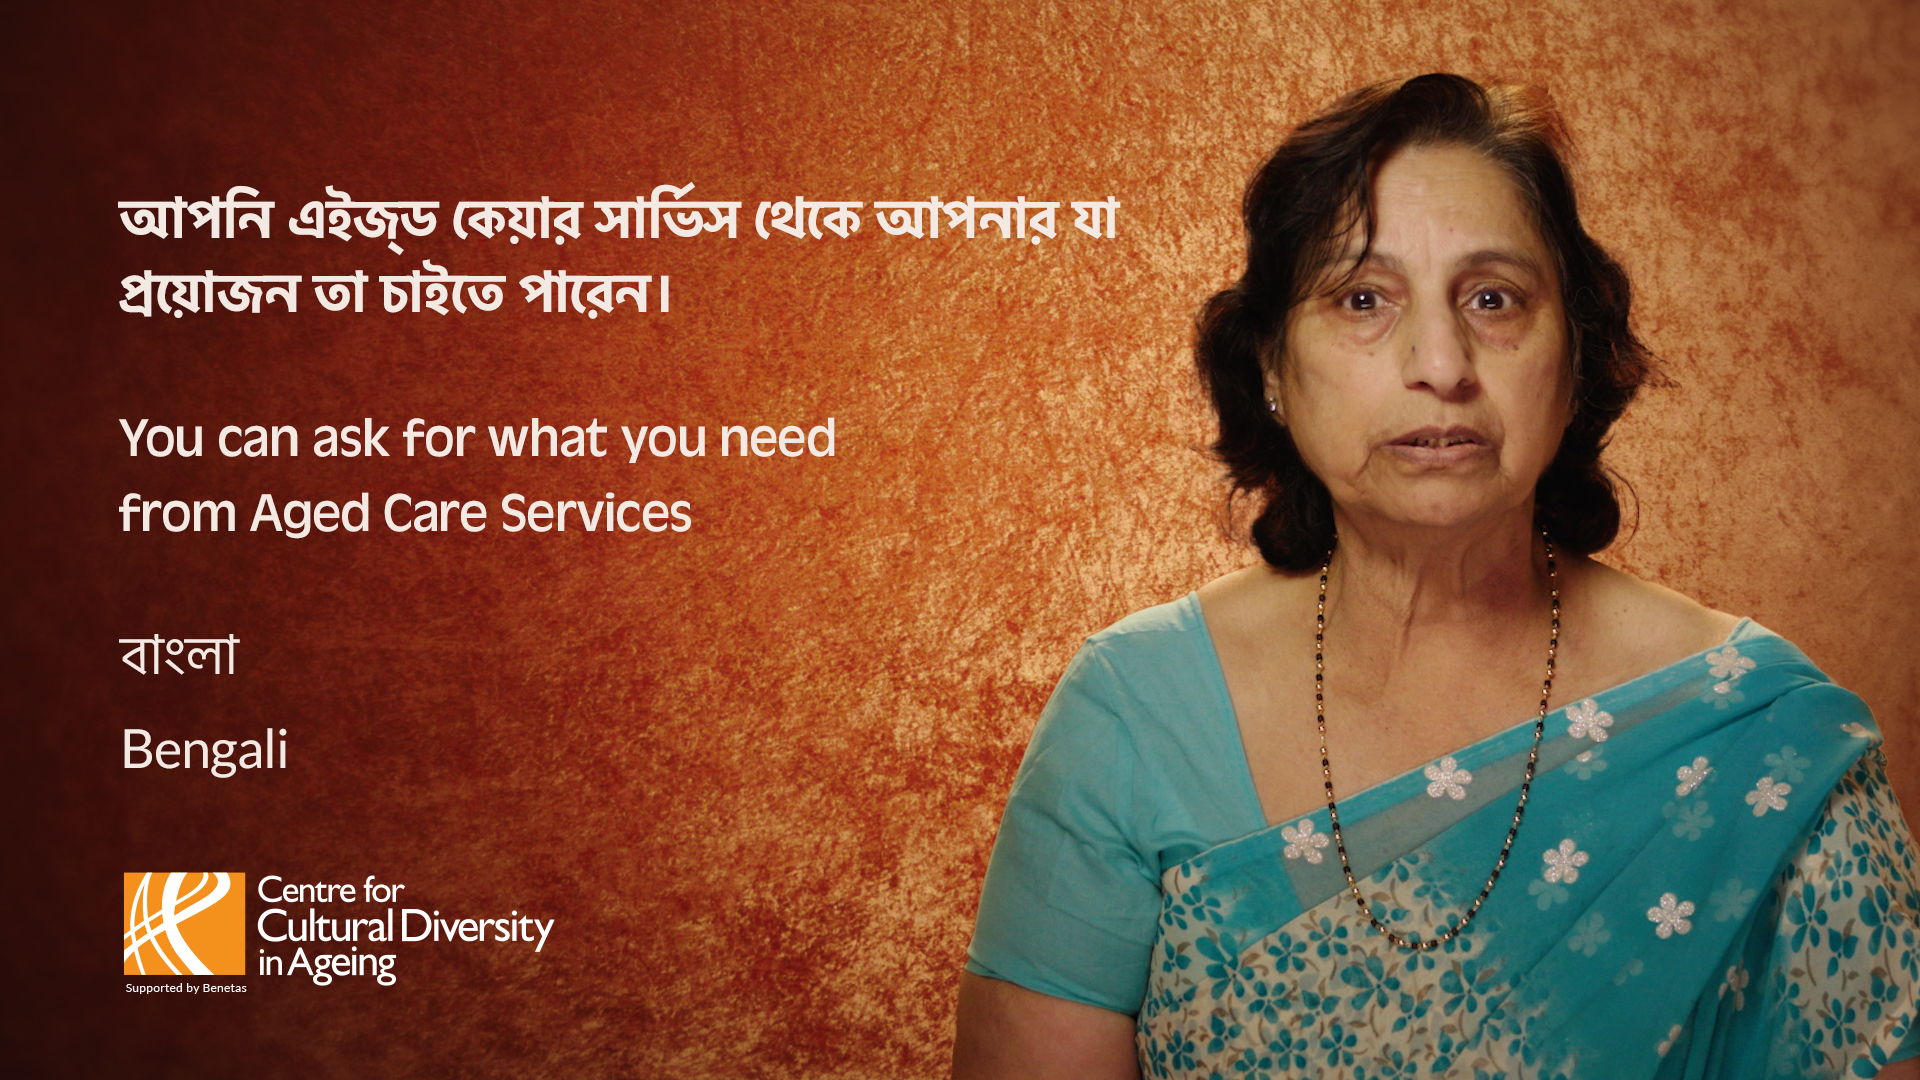 You can ask for what you need from aged care services bengali thumbnail